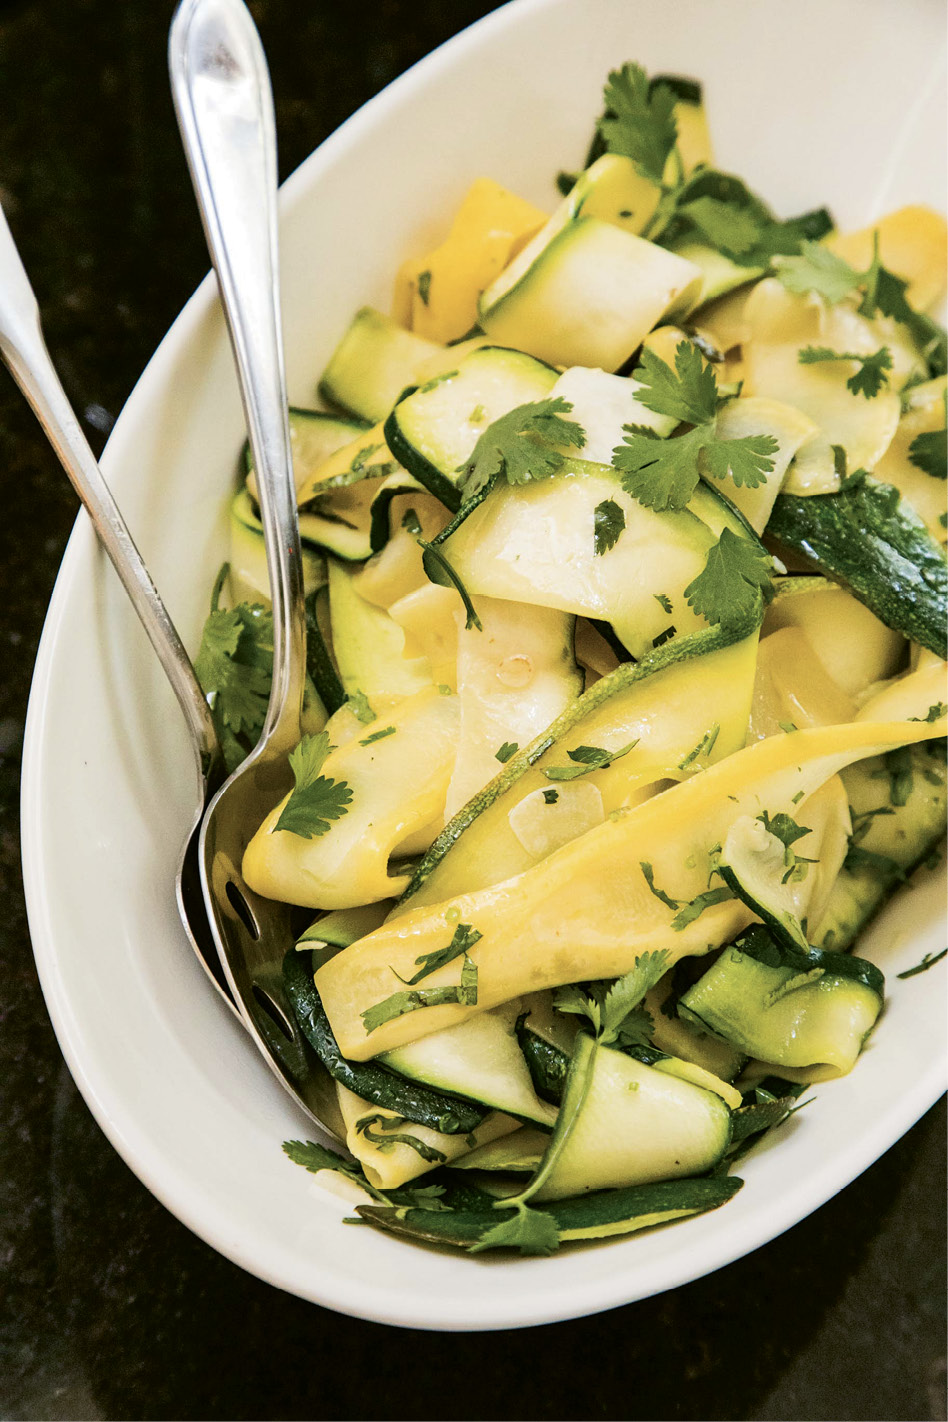 Leftover summer squash tastes great served chilled the next day.